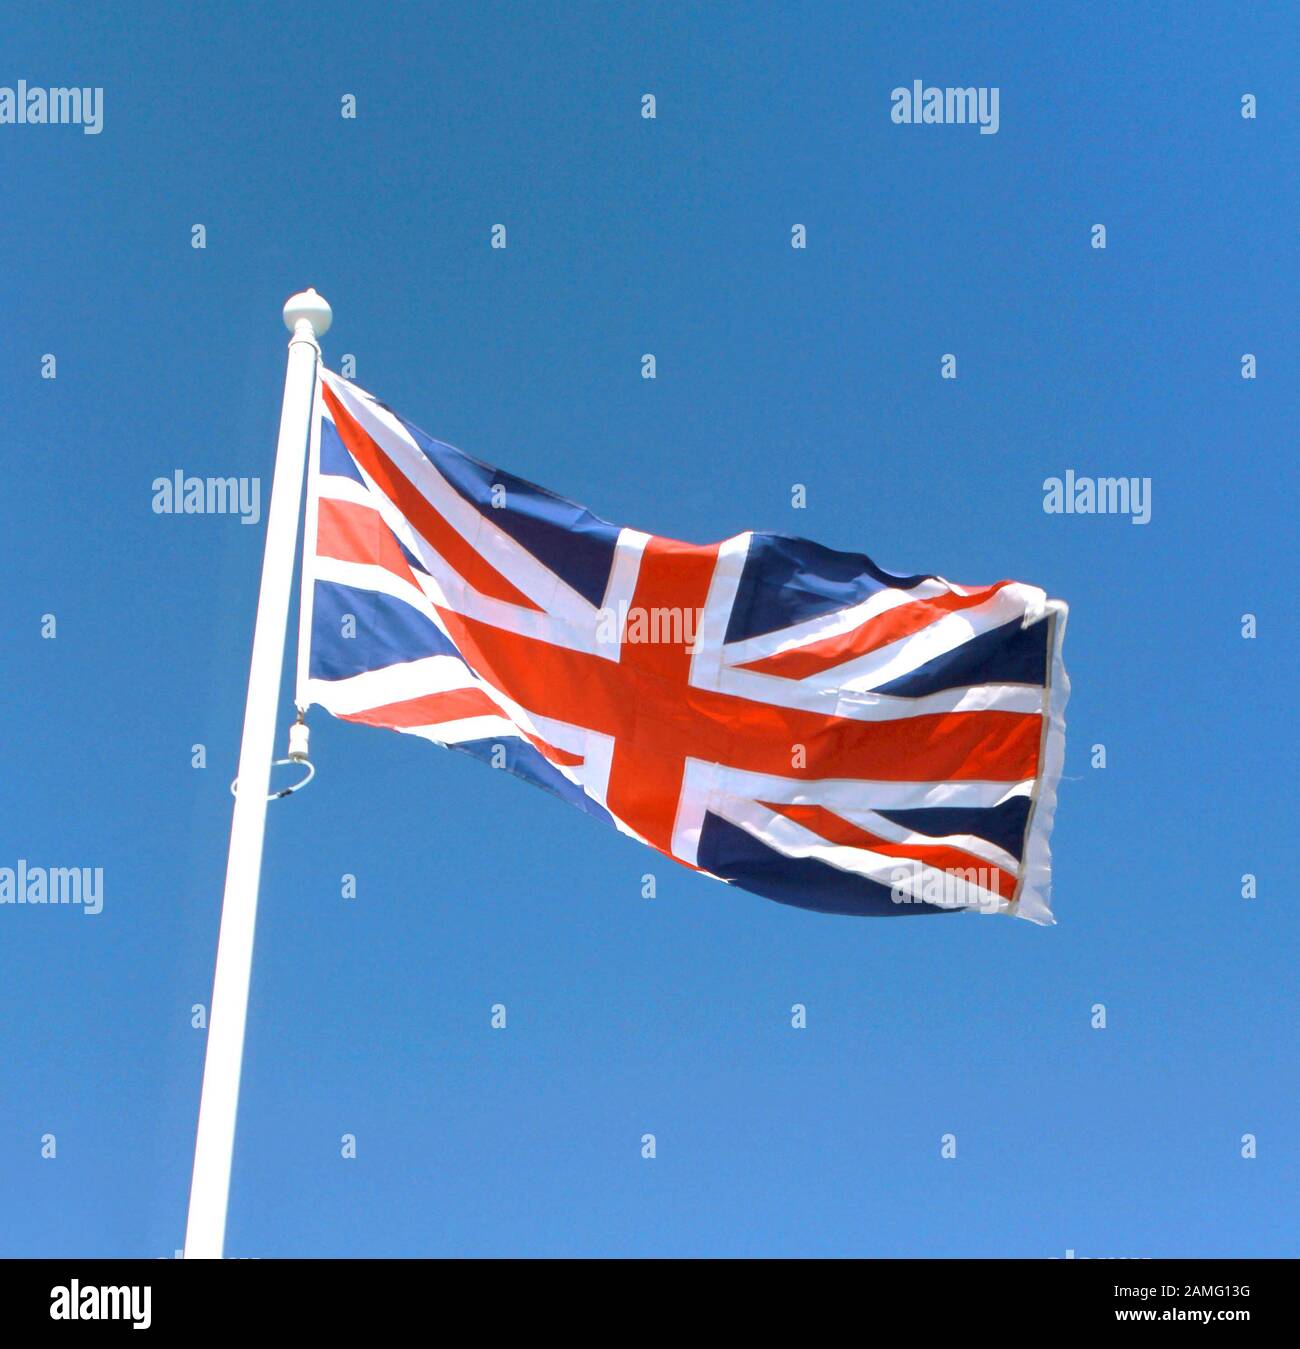 Union Jack flag of the United Kingdom flying in a bright blue sky, England. Stock Photo